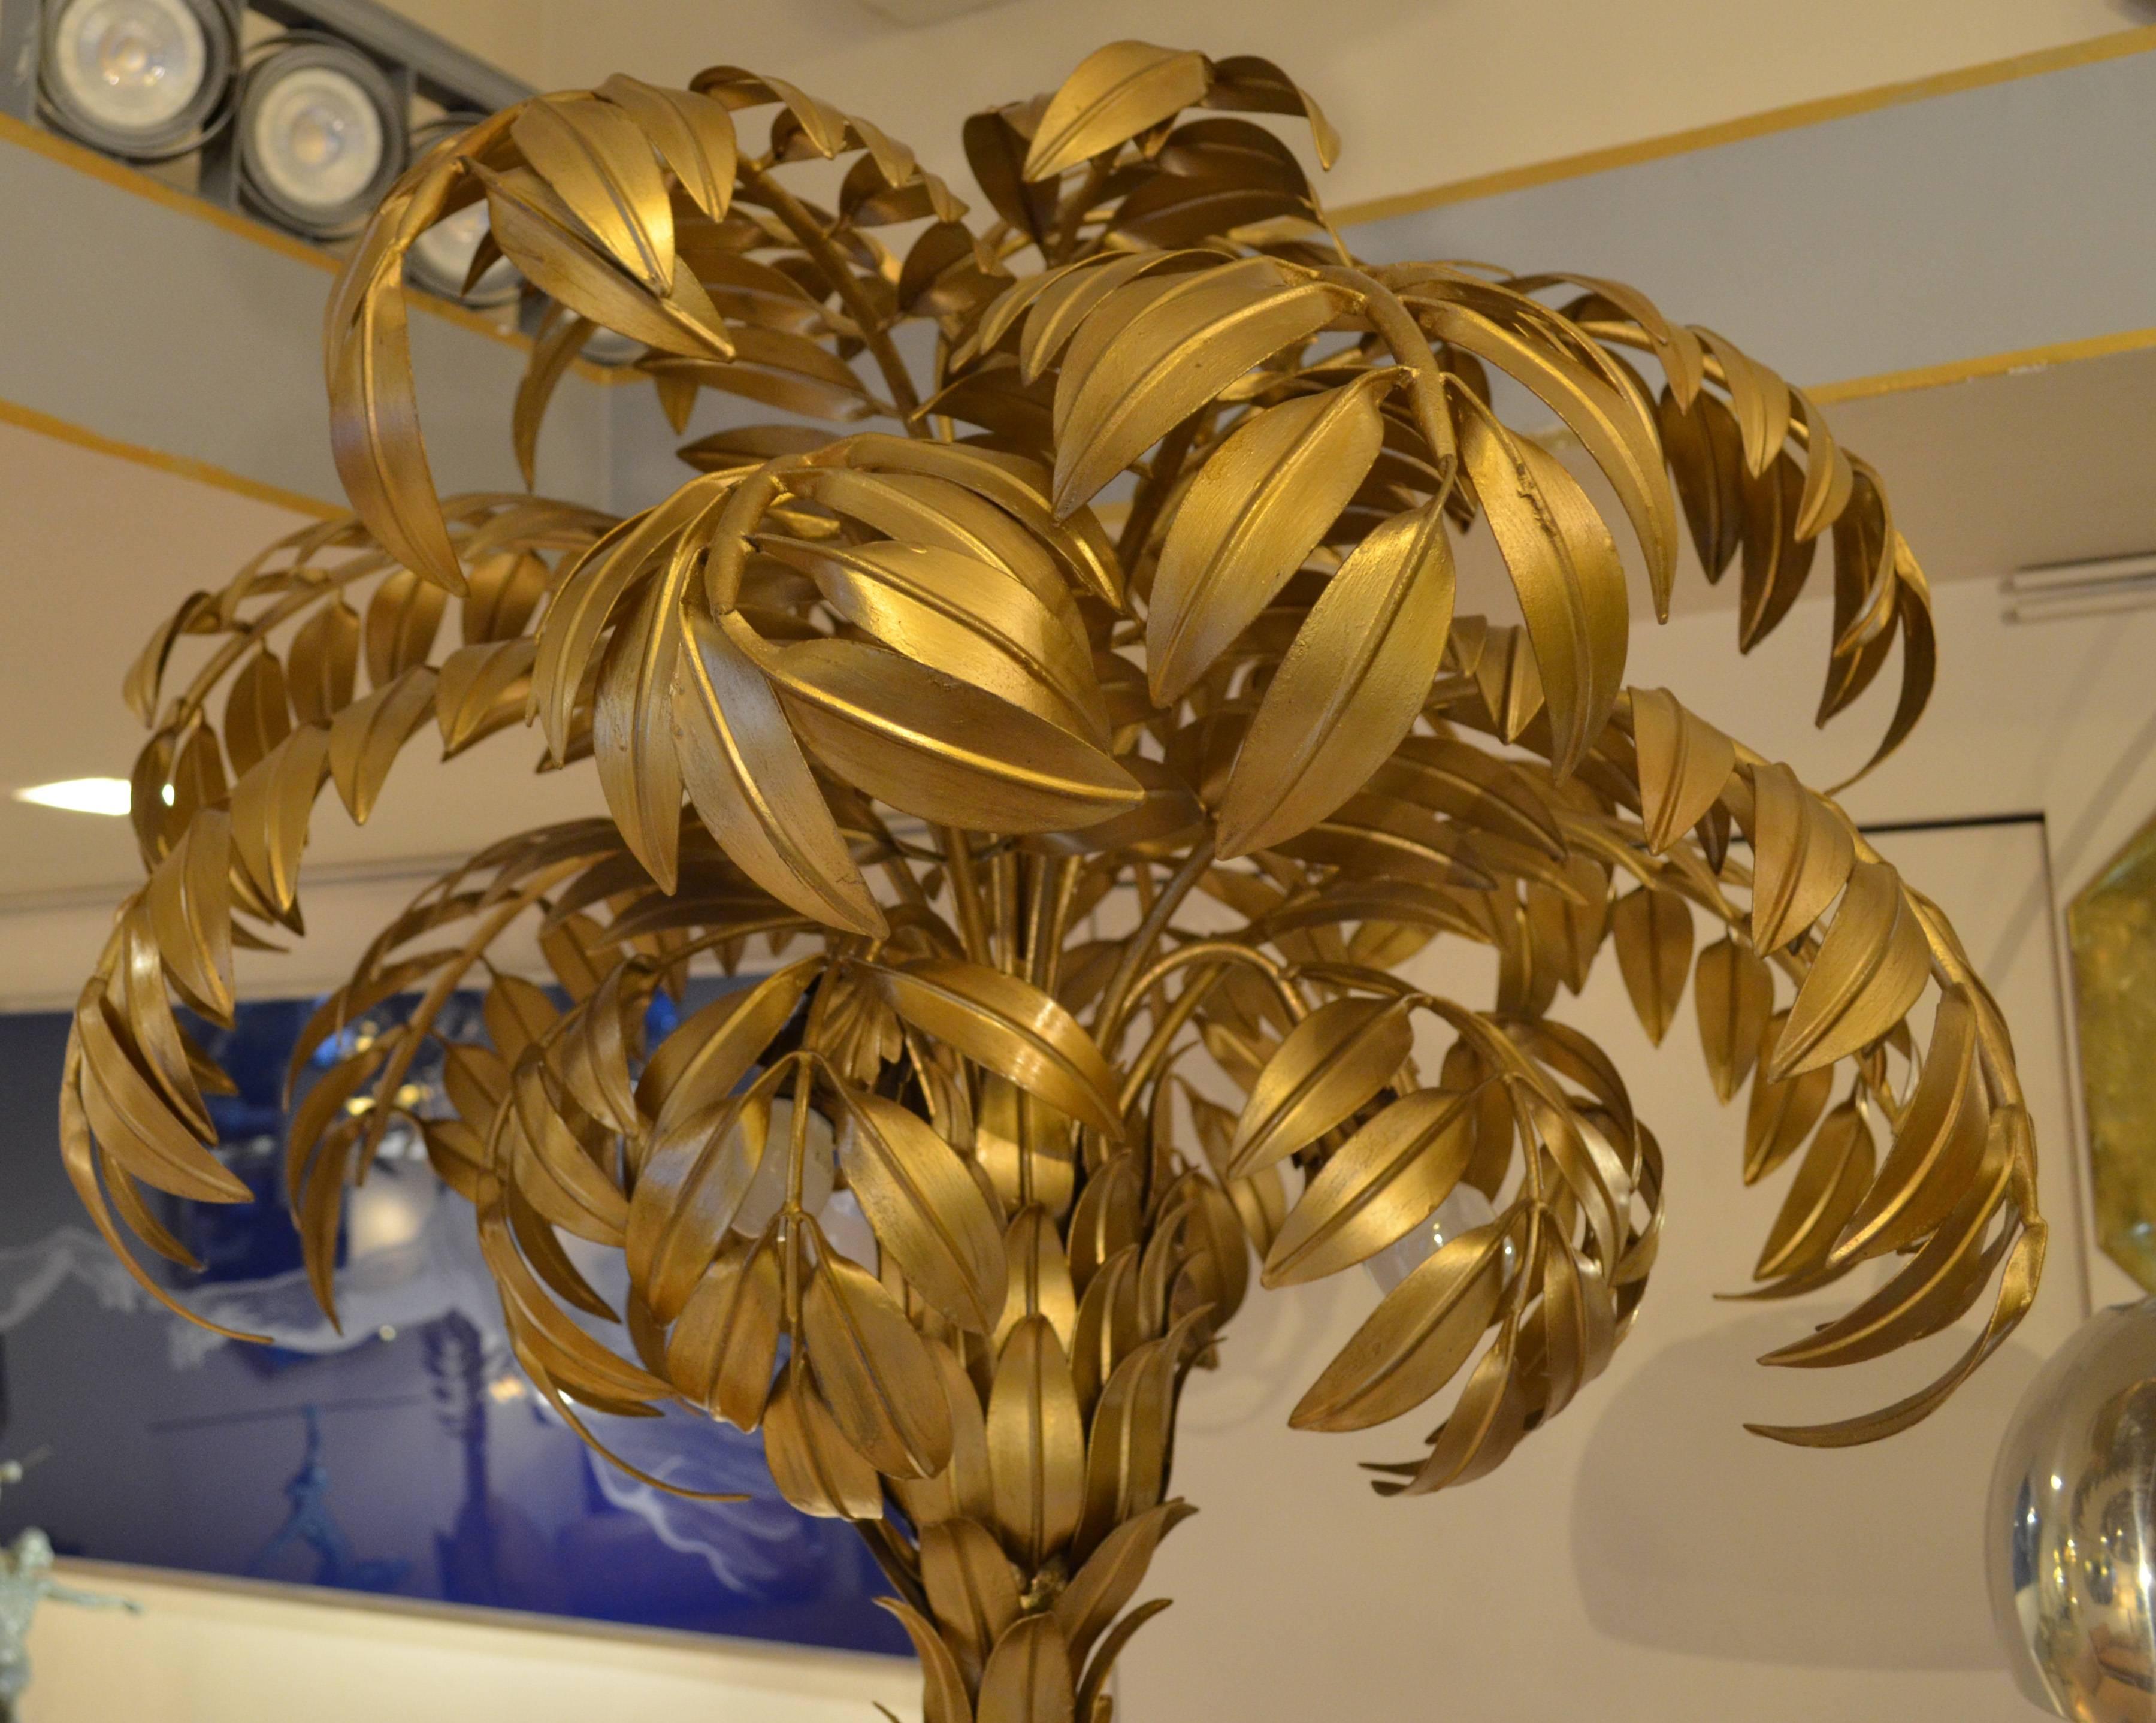 Huge and famous palm tree by Hans Kögl. This design icon comes from Germany and it is made out of golden metal. Its conditions are excellent coherent with prior use and age. It features three light hidden by the metal leaves. It is high 220 cm, with